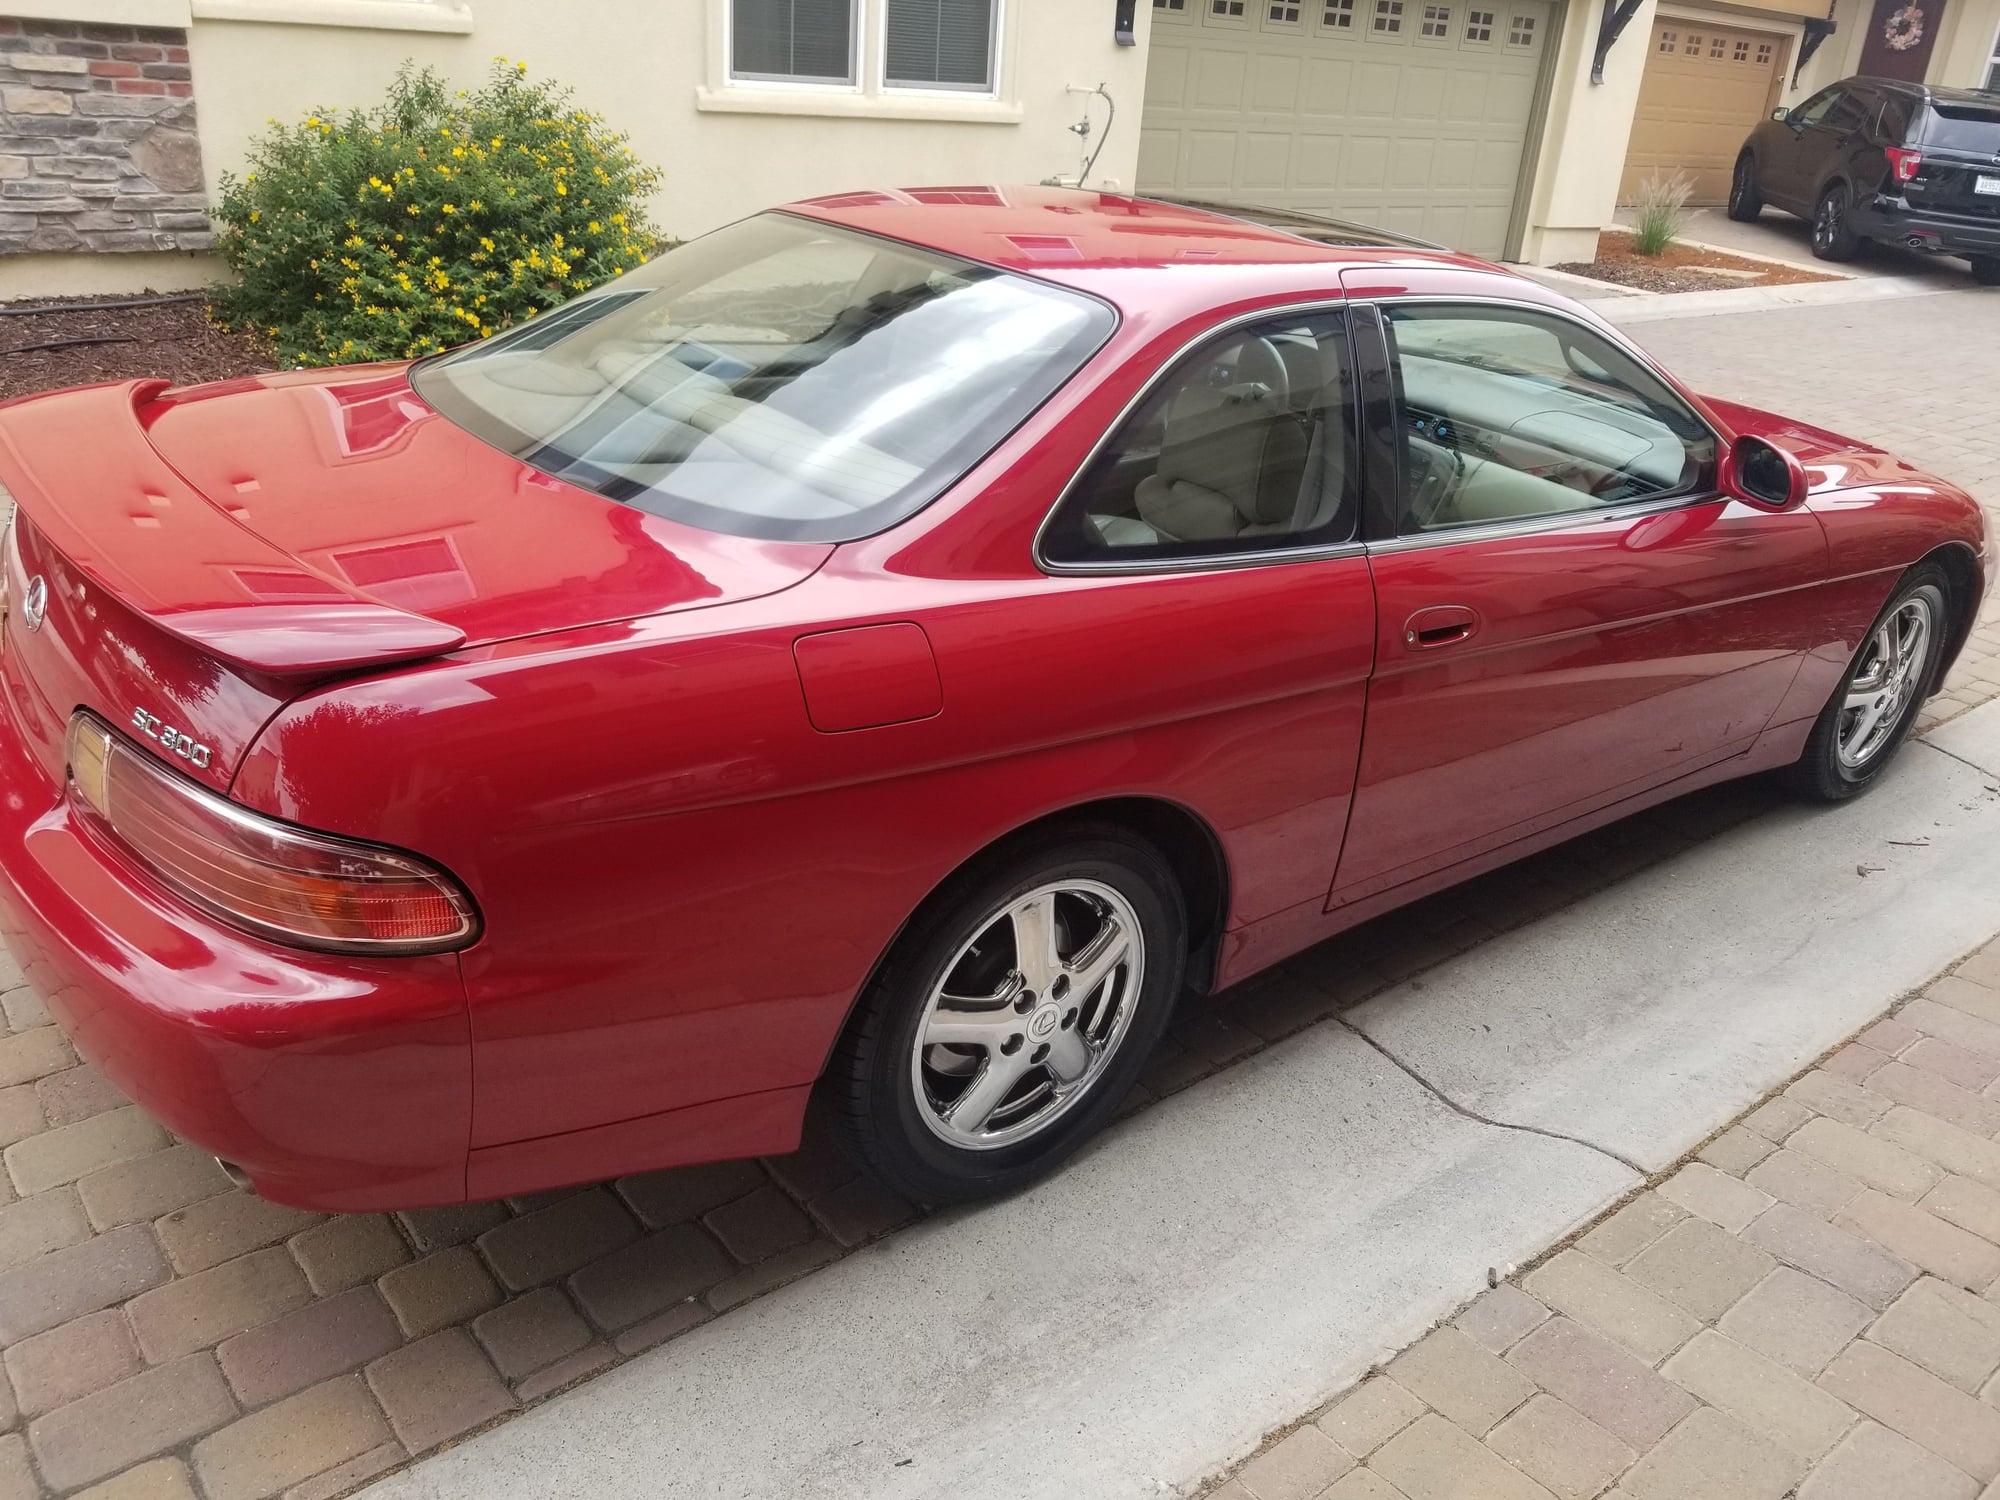 1999 Lexus SC300 - 1999 Lexus SC300 - Used - VIN JT8CD32Z6X1006483 - 134,800 Miles - 6 cyl - 2WD - Automatic - Coupe - Red - Brentwood, CA 94513, United States